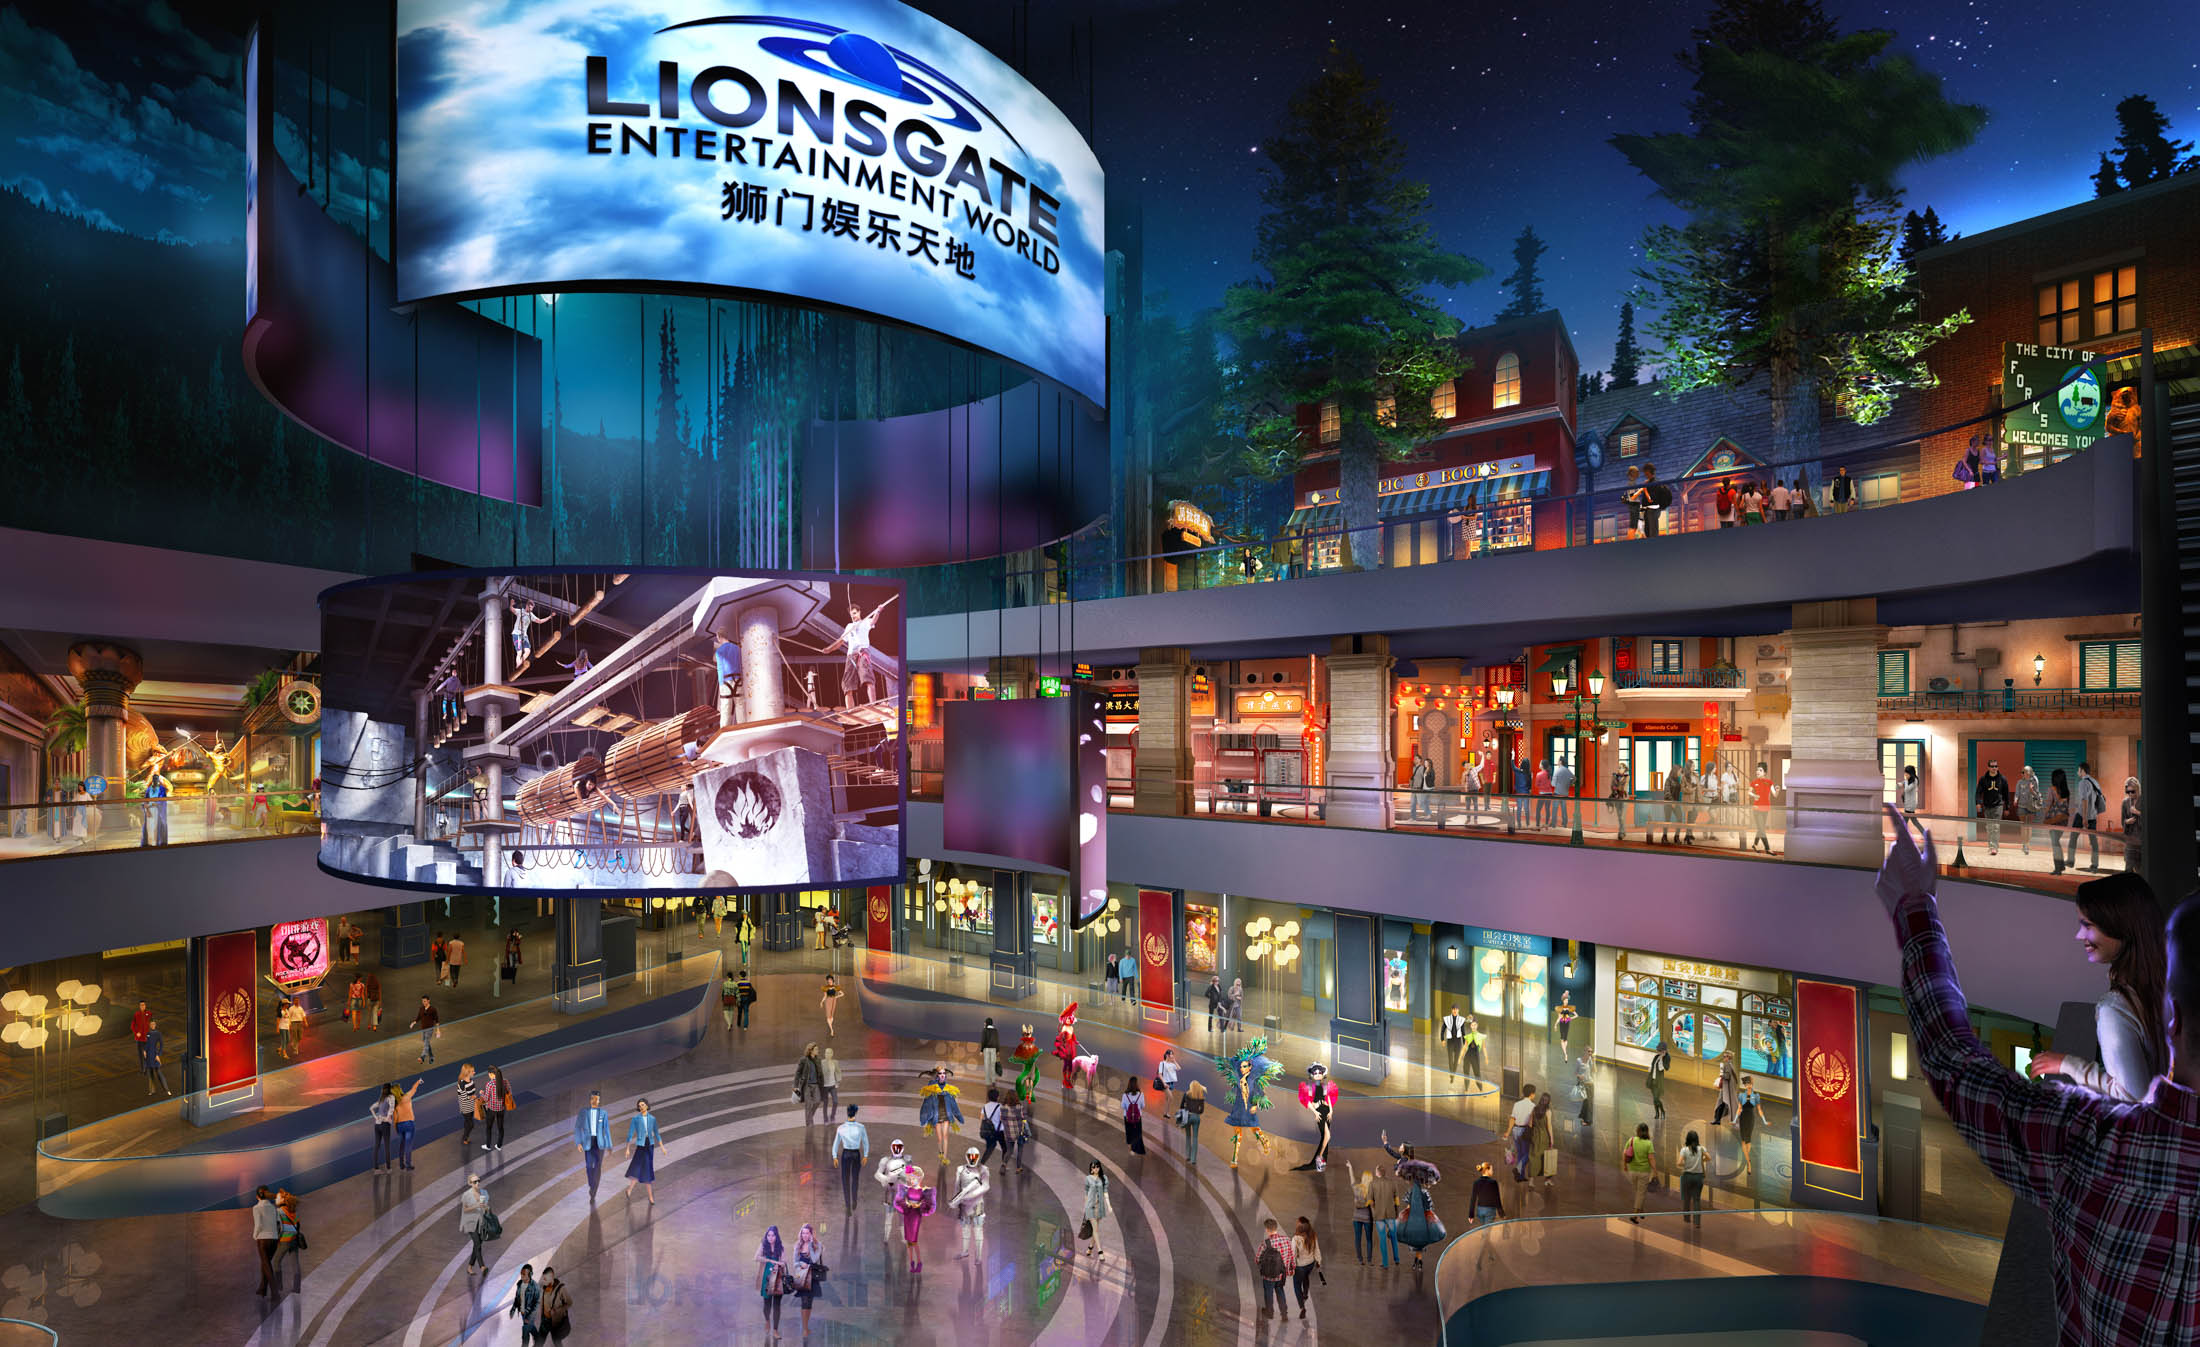 A rendering of the main atrium at Lionsgate Entertainment World.